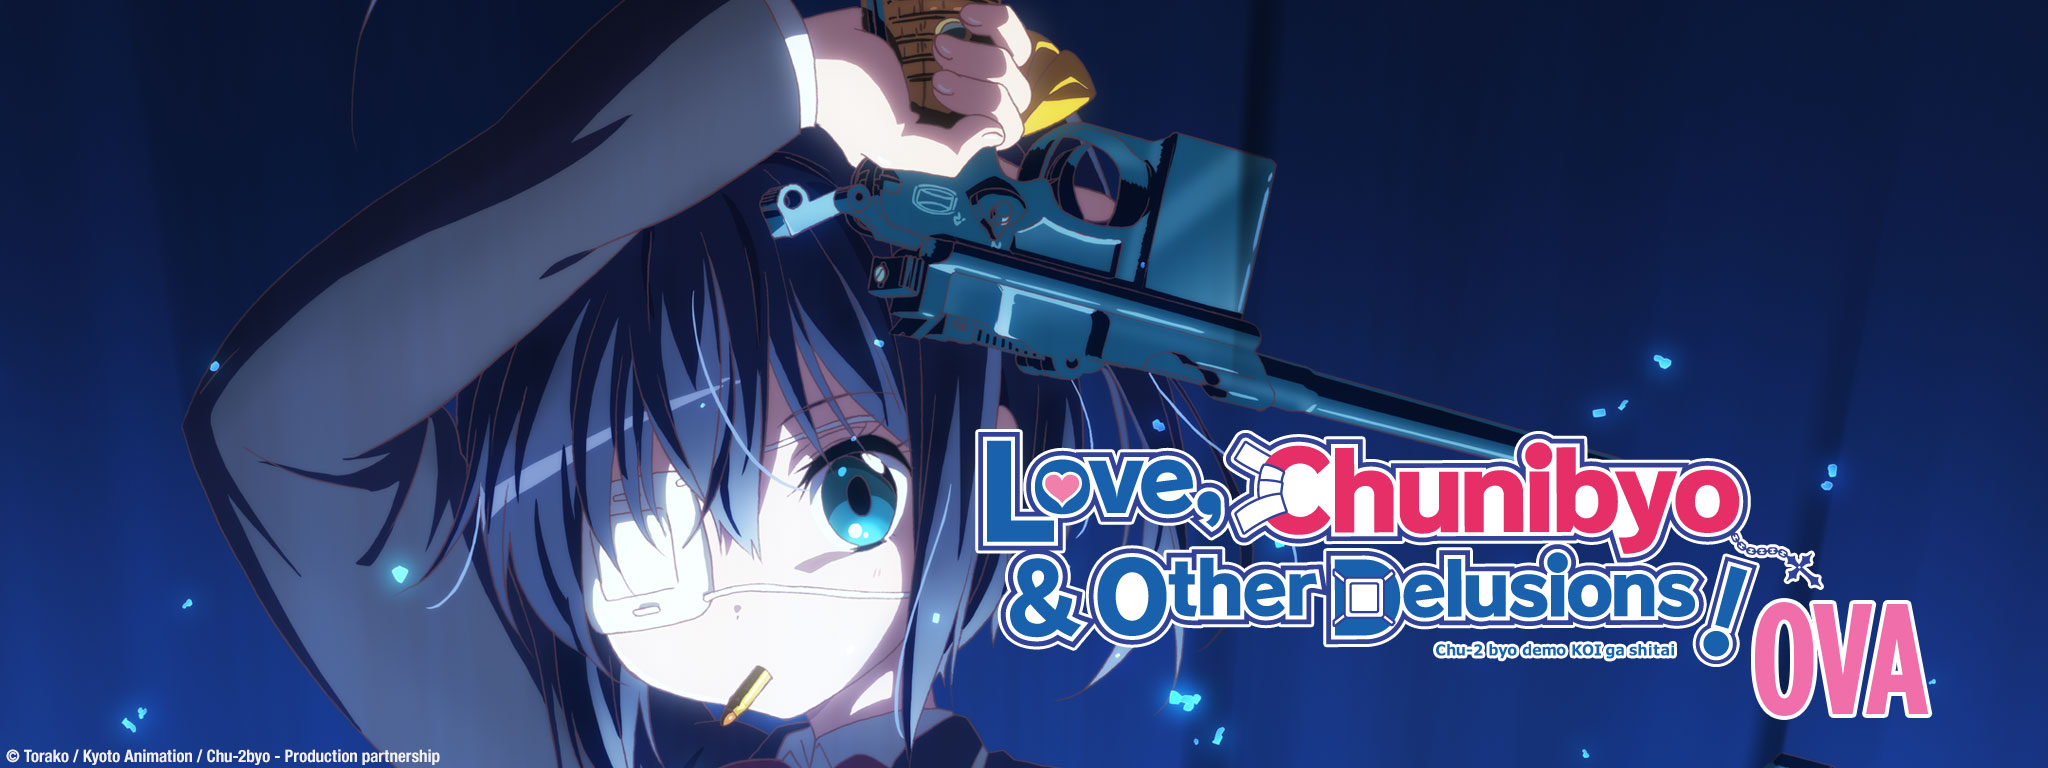 Title Art for Love, Chunibyo & Other Delusions! OVA